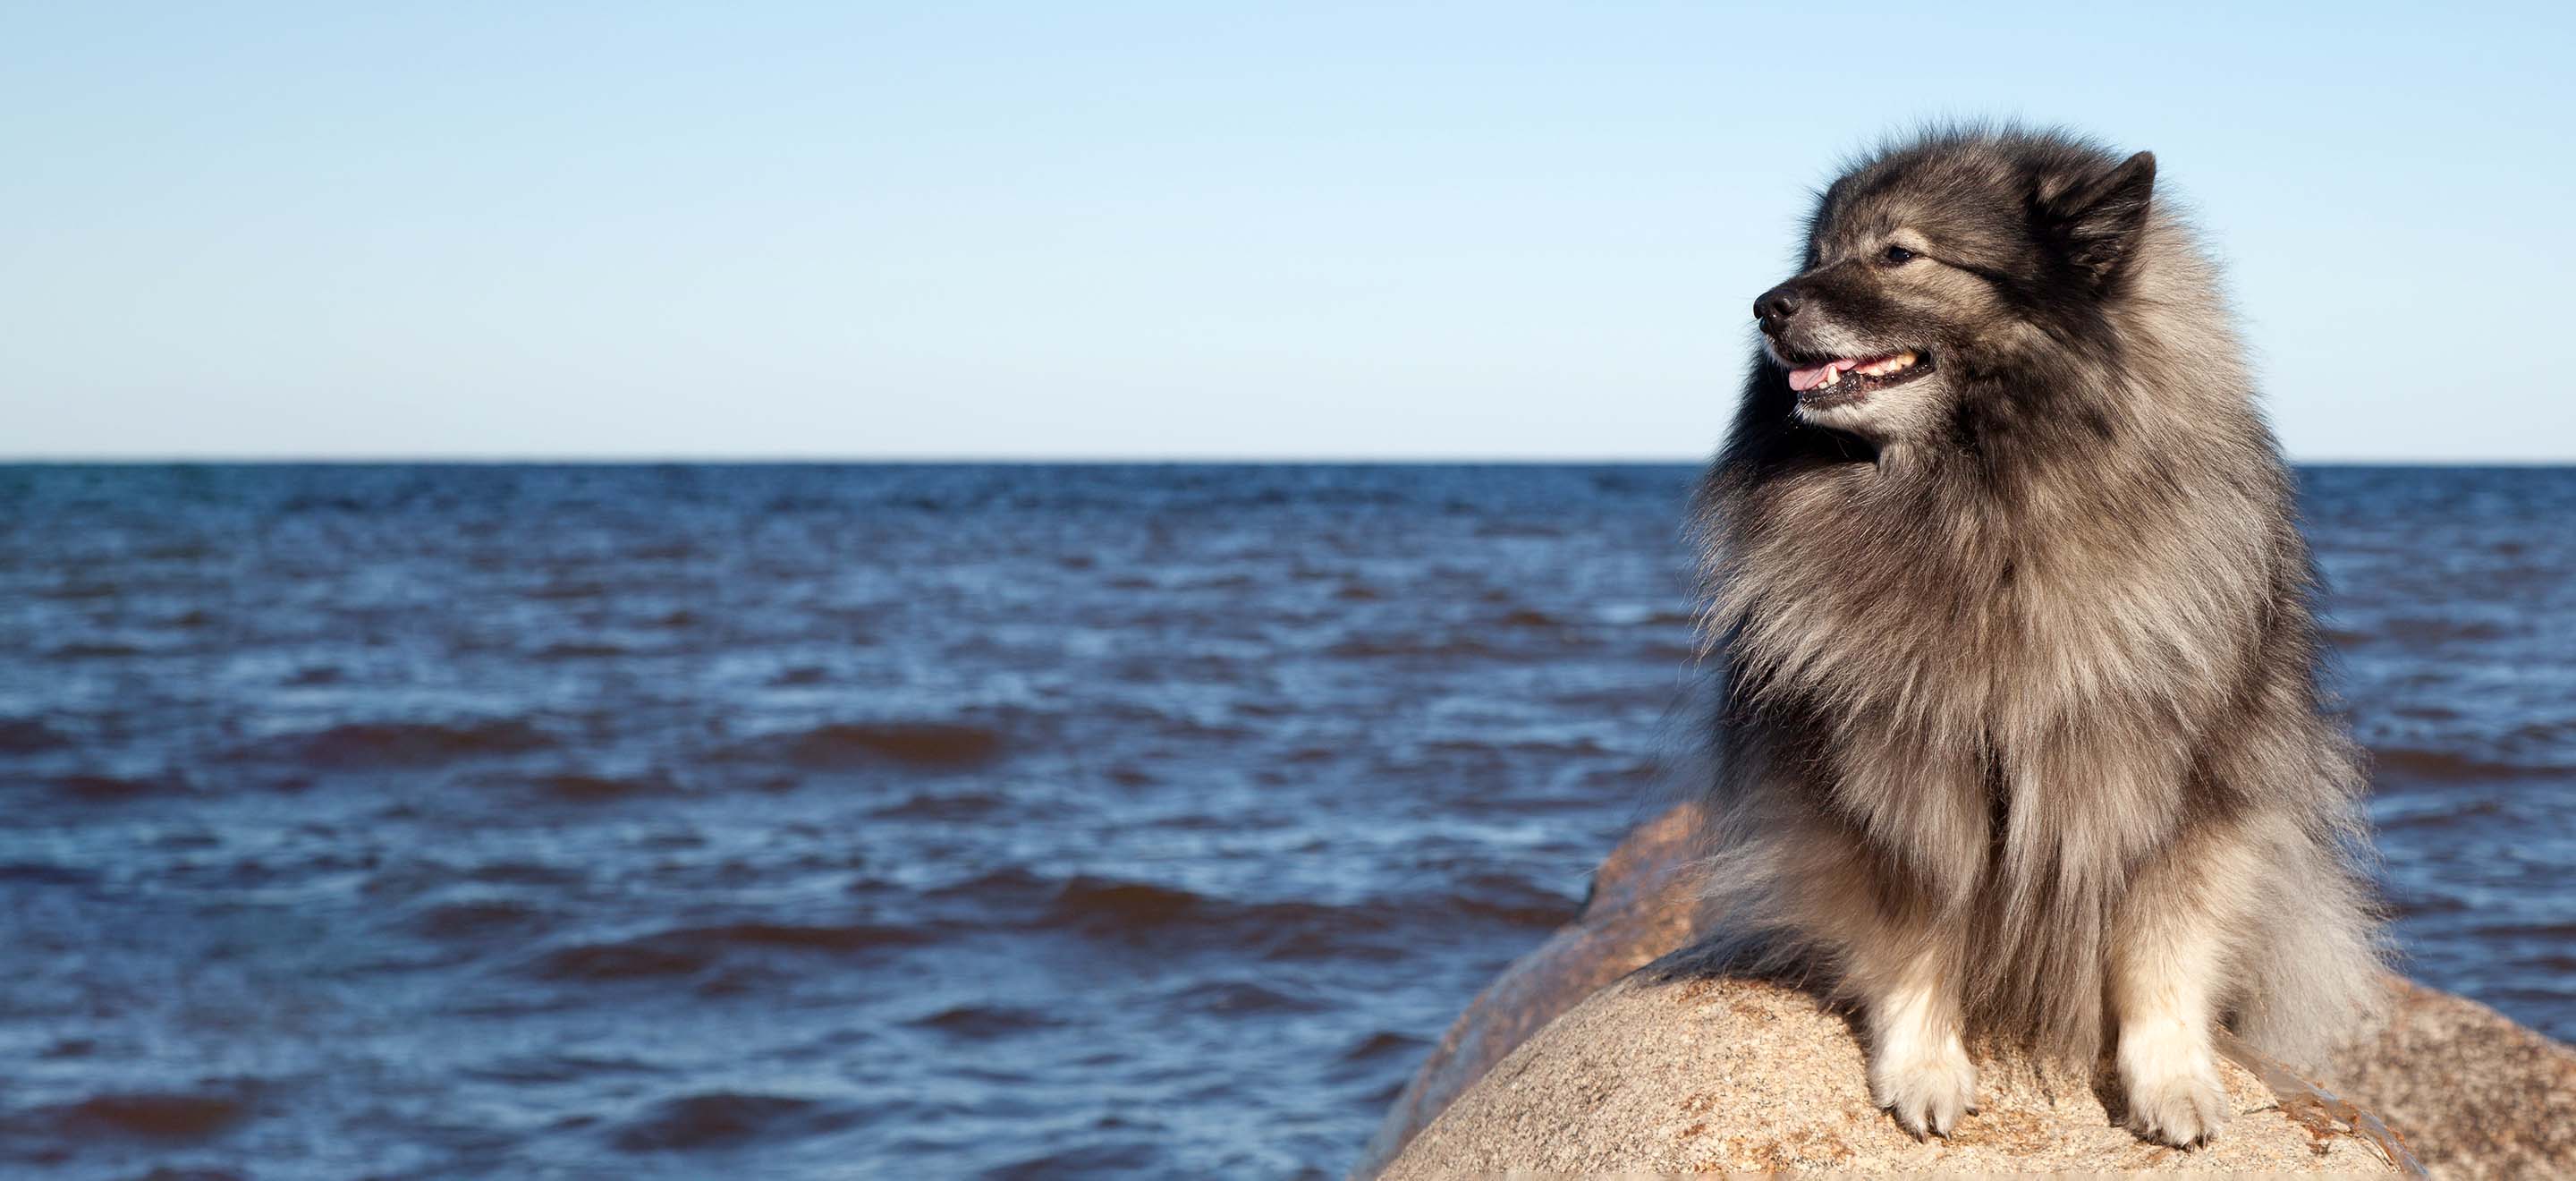 A Keeshond dog standing on a rock in front of the ocean image